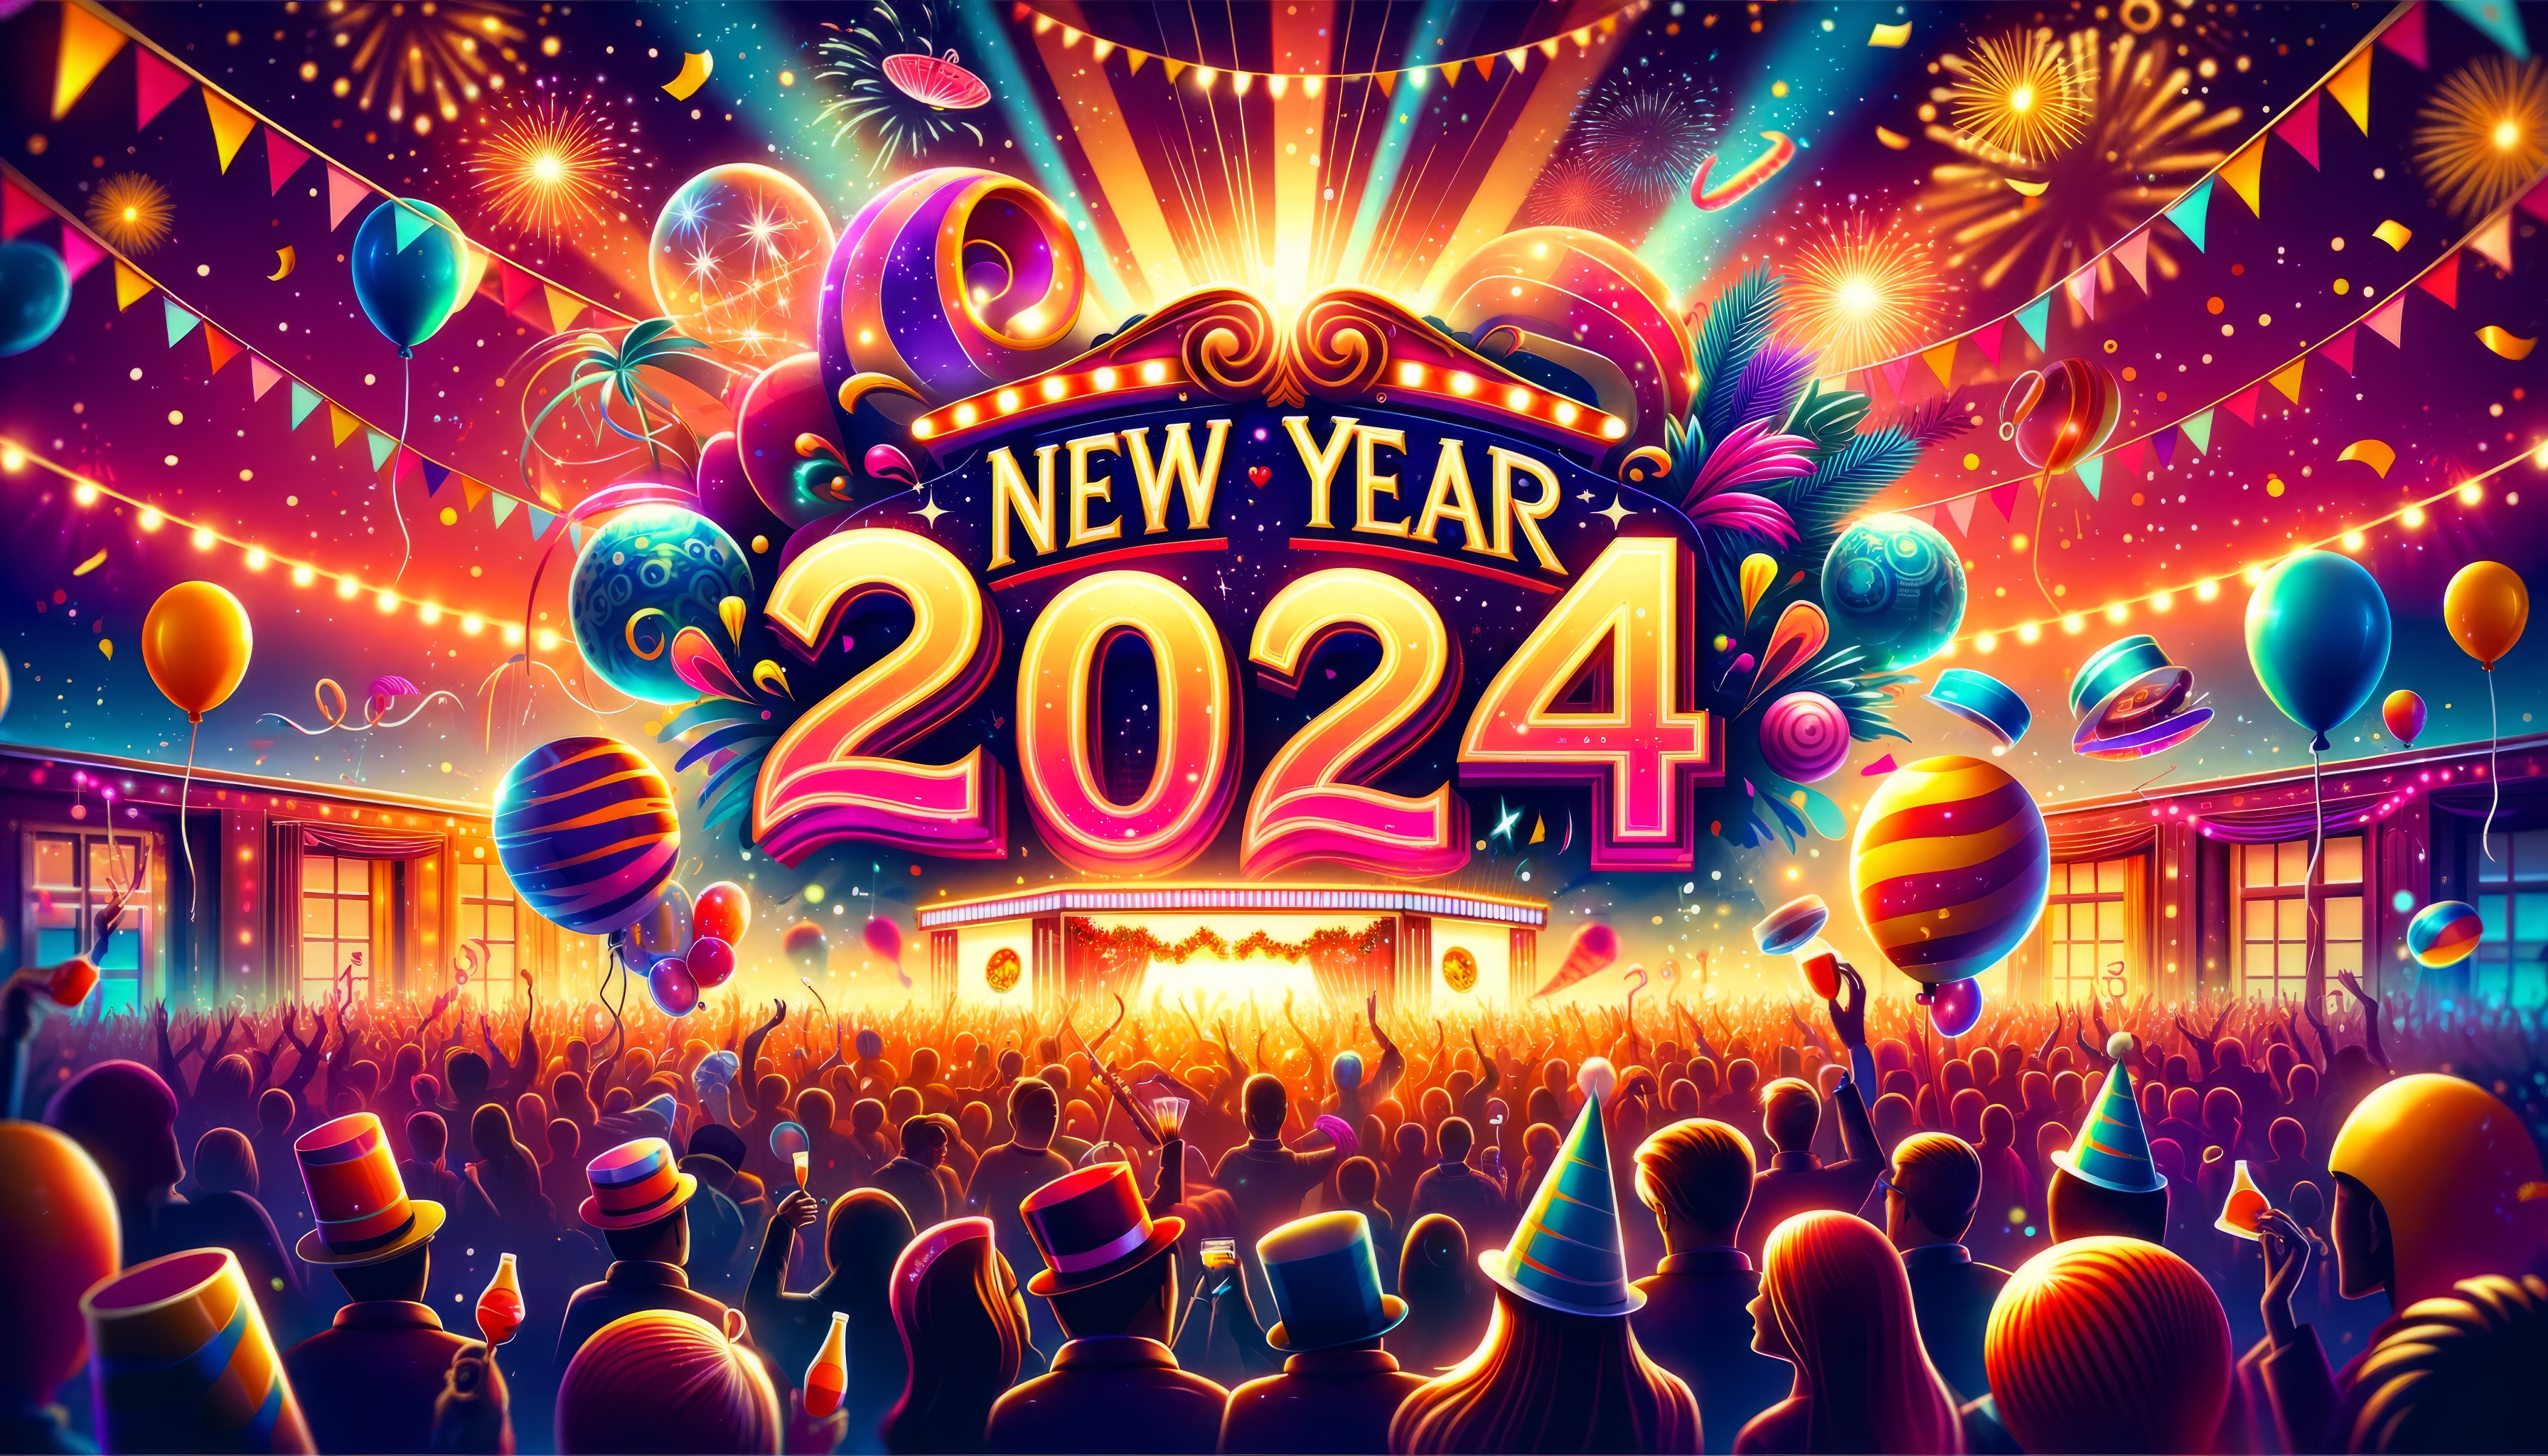 Colorful New Year 2024 celebration HD desktop wallpaper featuring festive fireworks, balloons, and a cheering crowd.